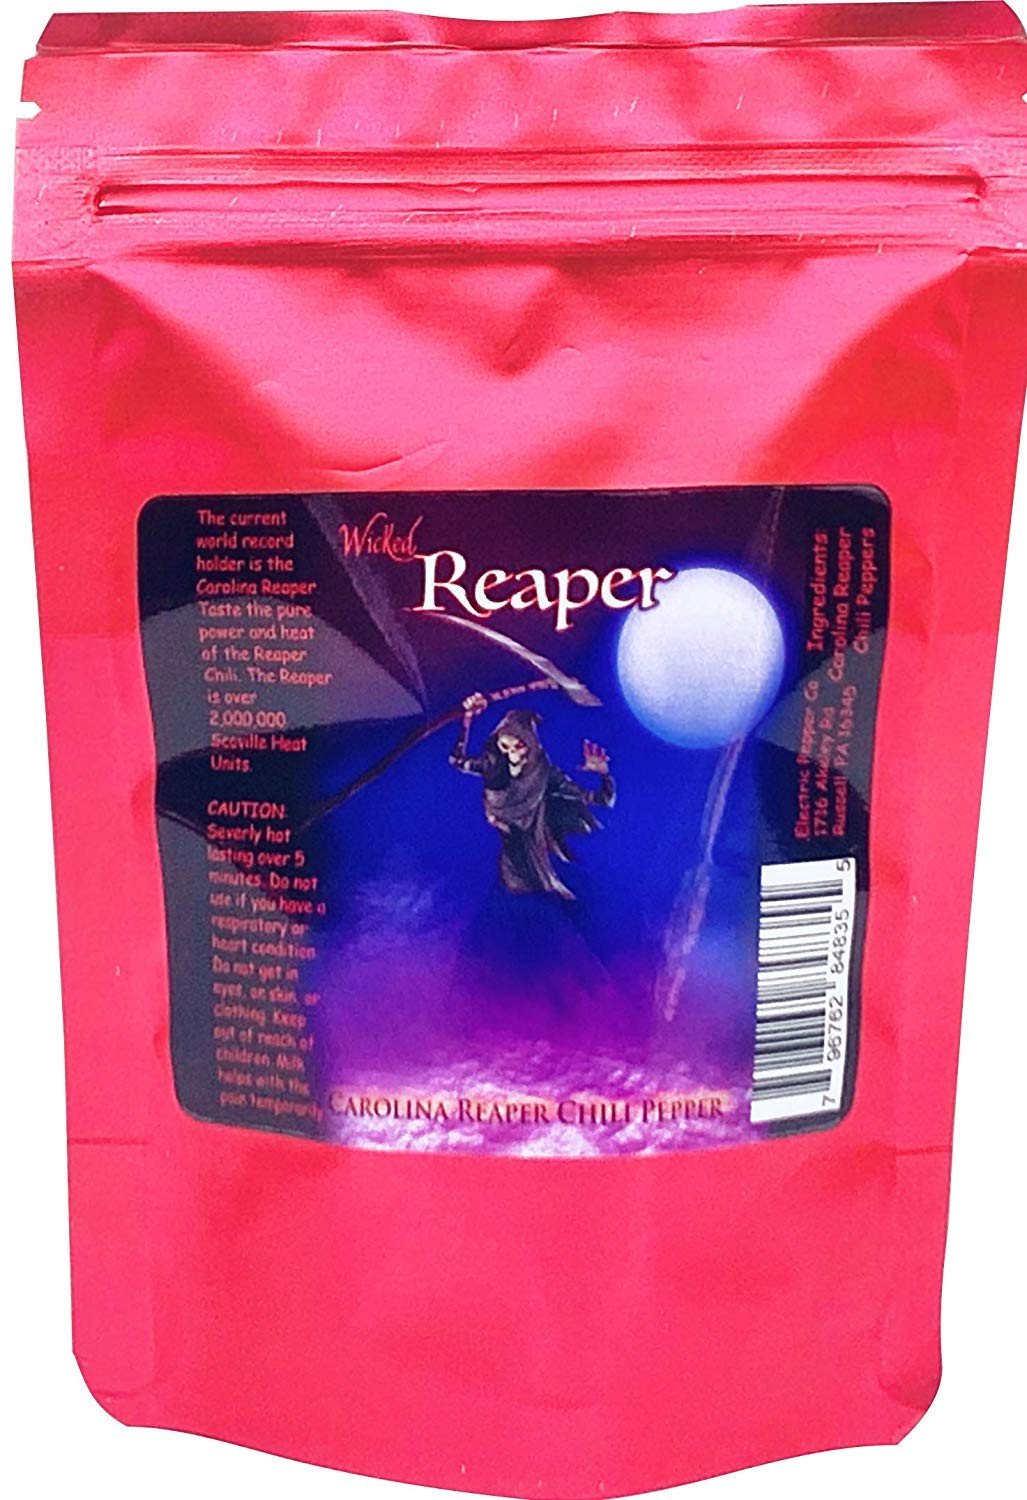 Spicy Blaze - Carolina Reaper Chili Peppers: Wicked Reaper Spice Adventure Pack of 5